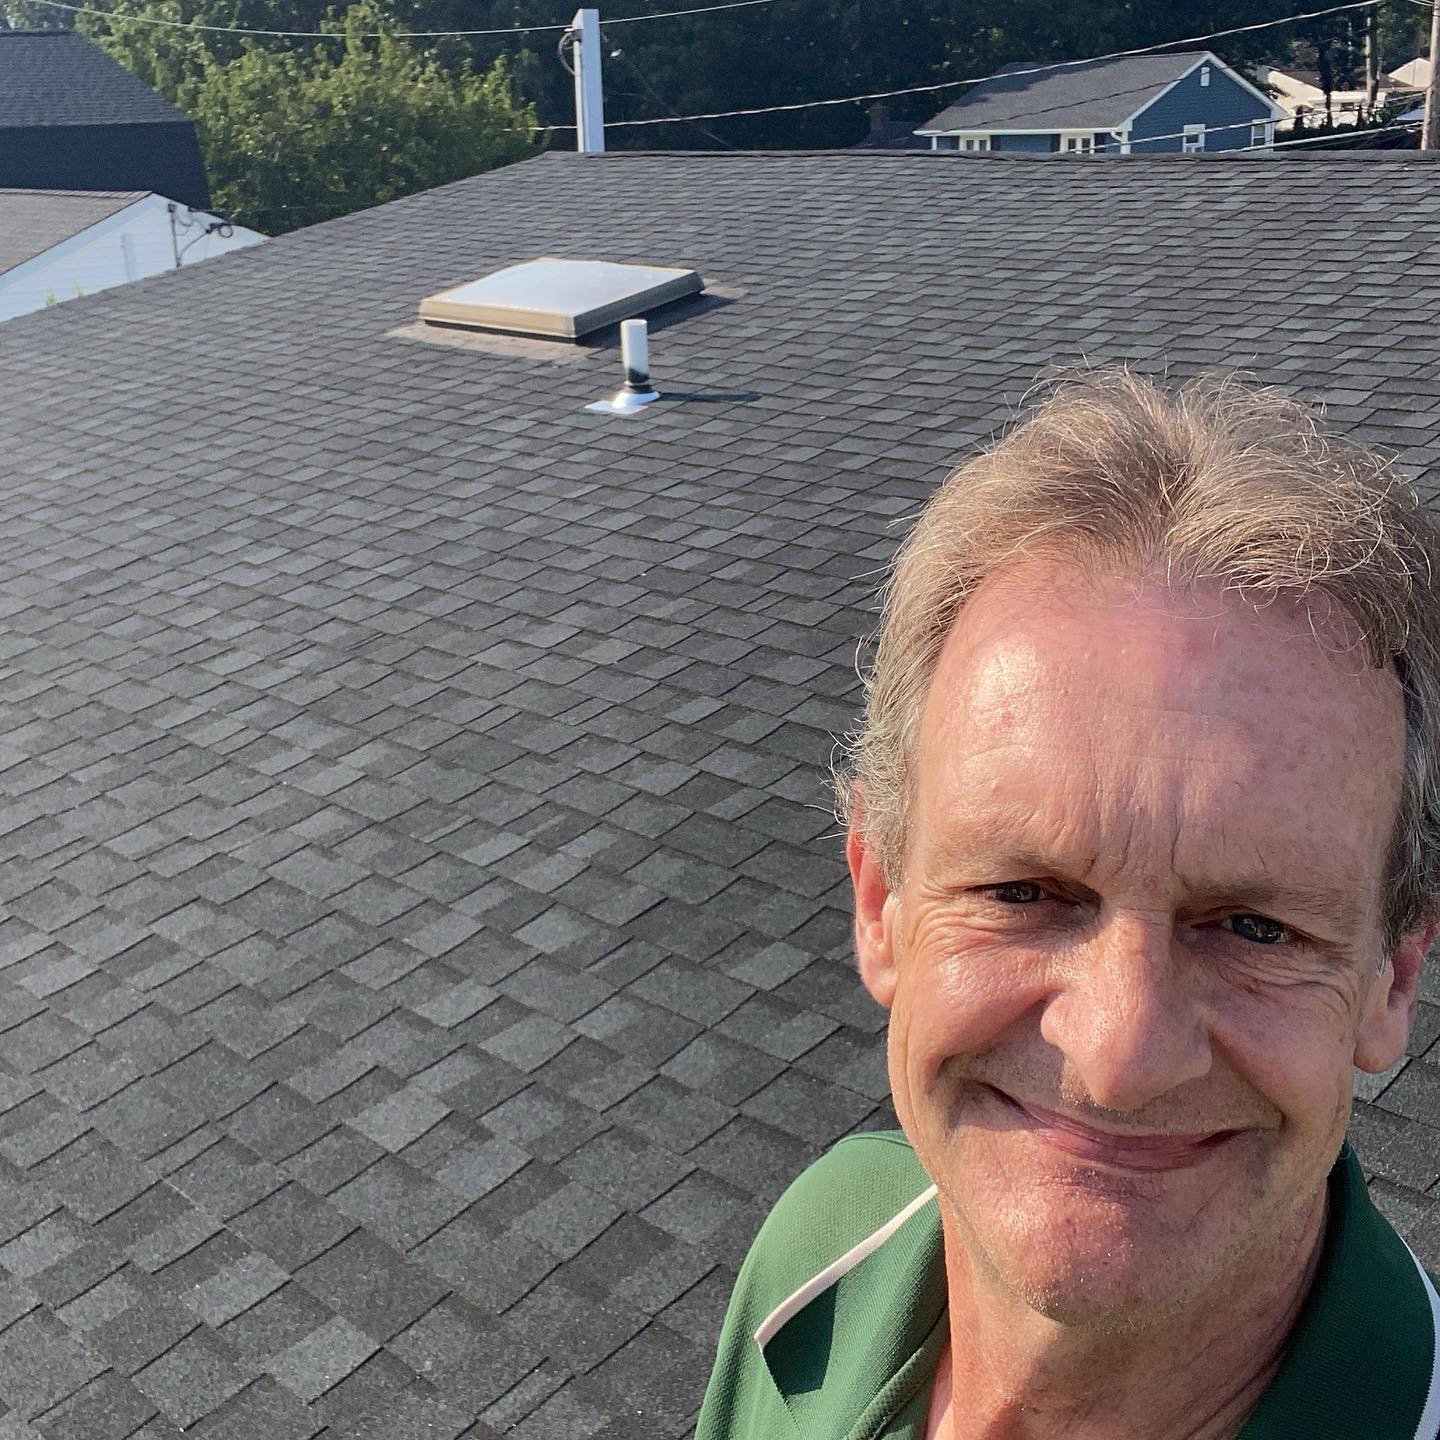 John inspecting a roof on a home in Suffolk County